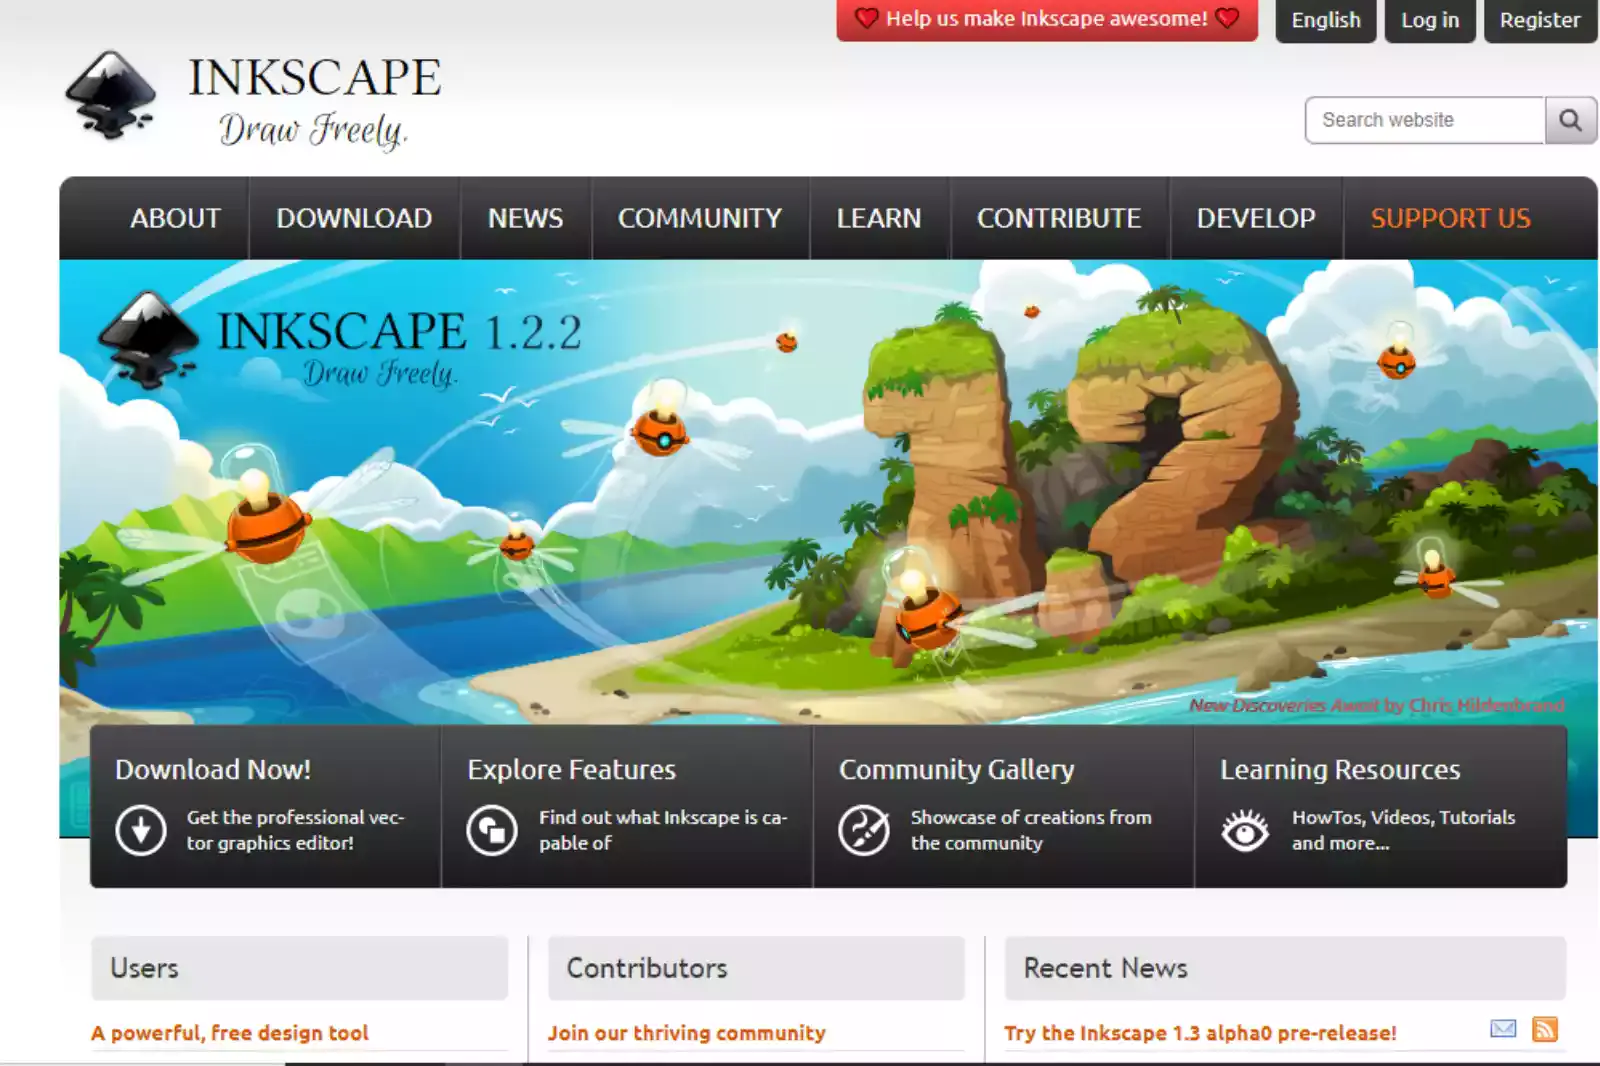 Home Page of Inkscape